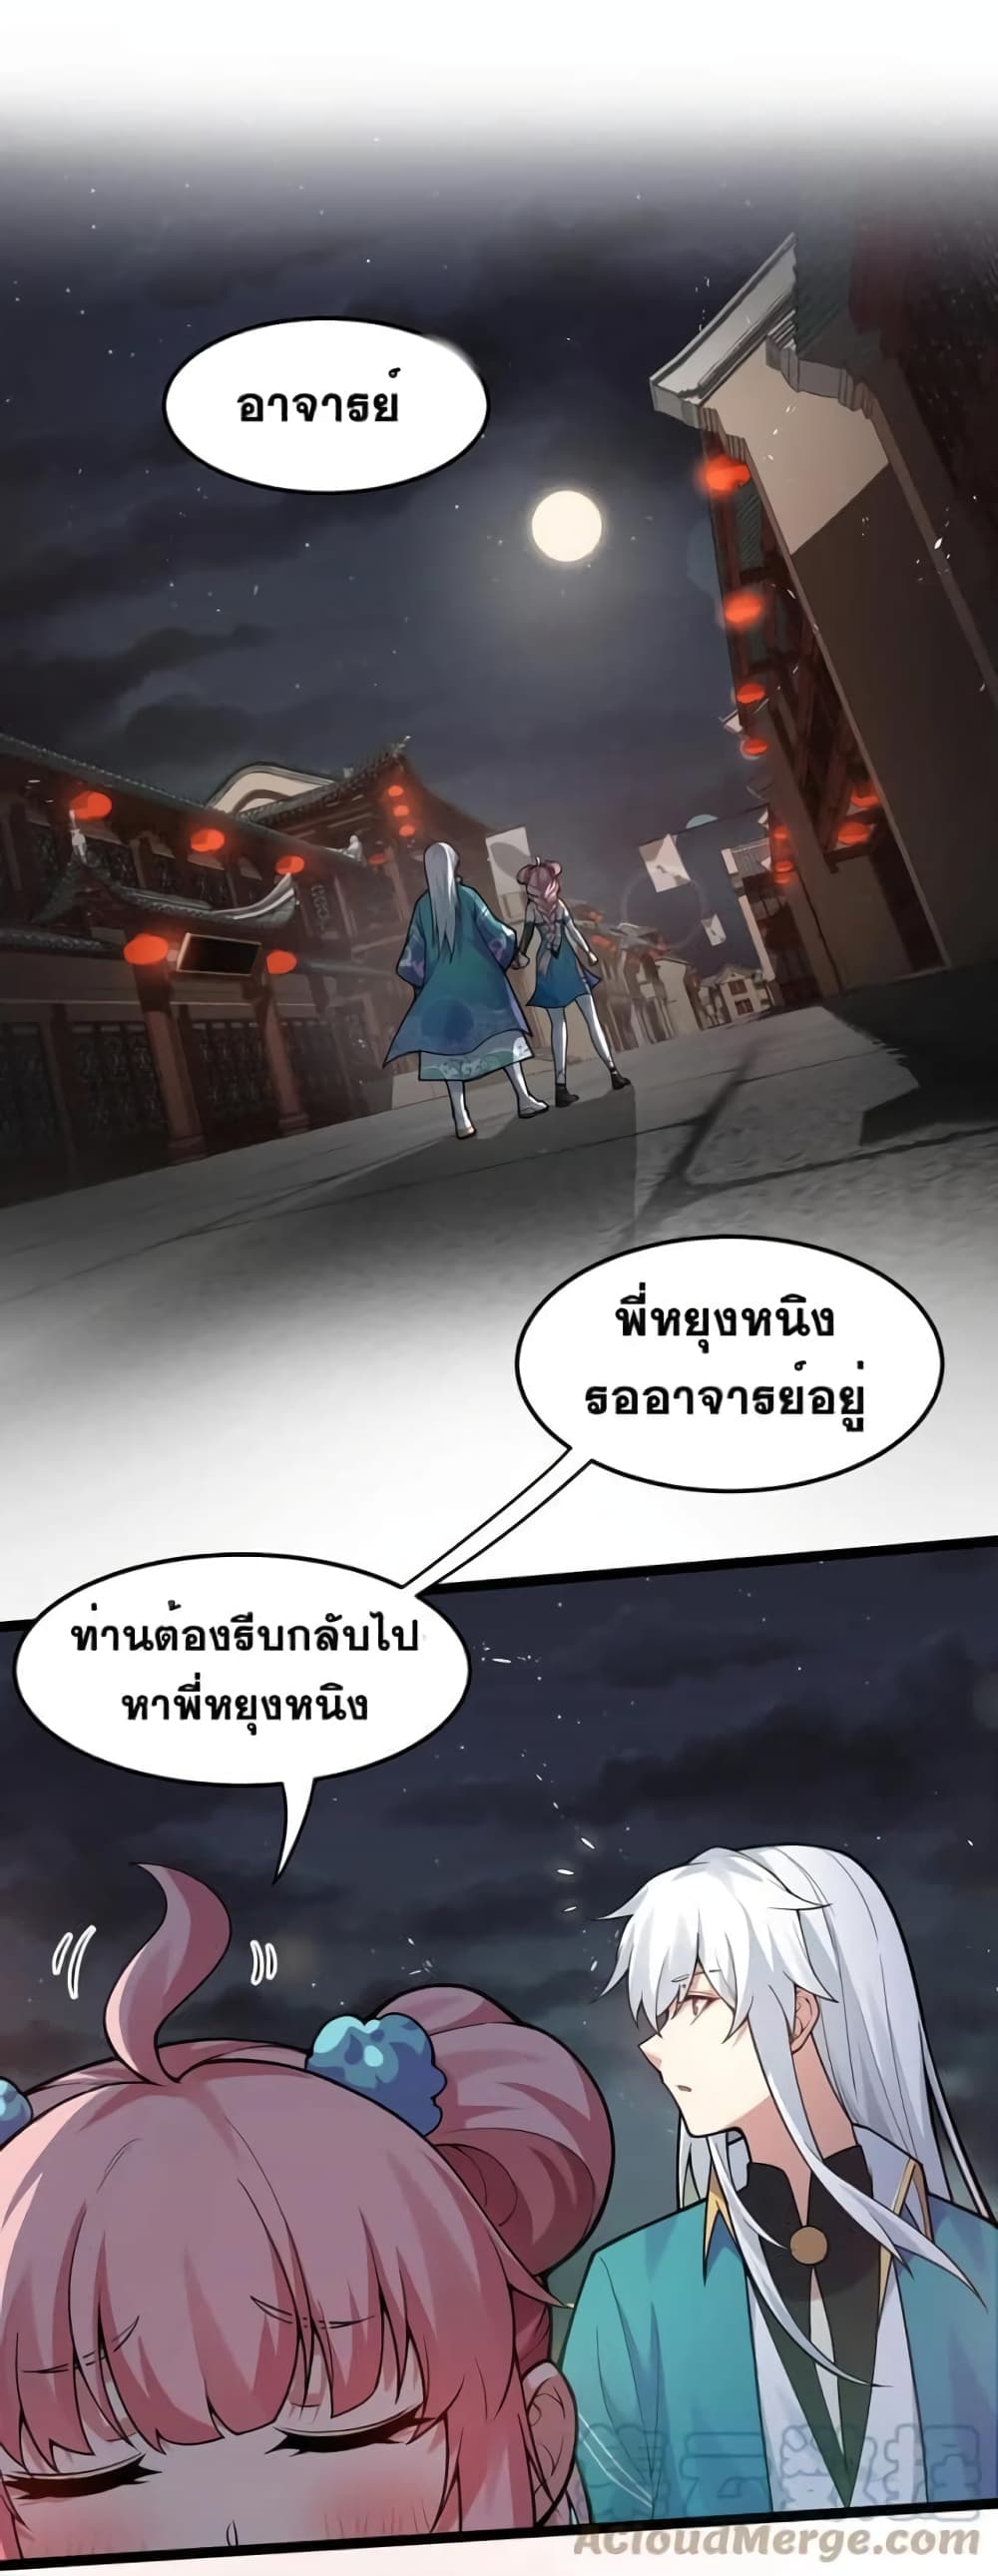 Godsian Masian from Another World ตอนที่ 106 (1)